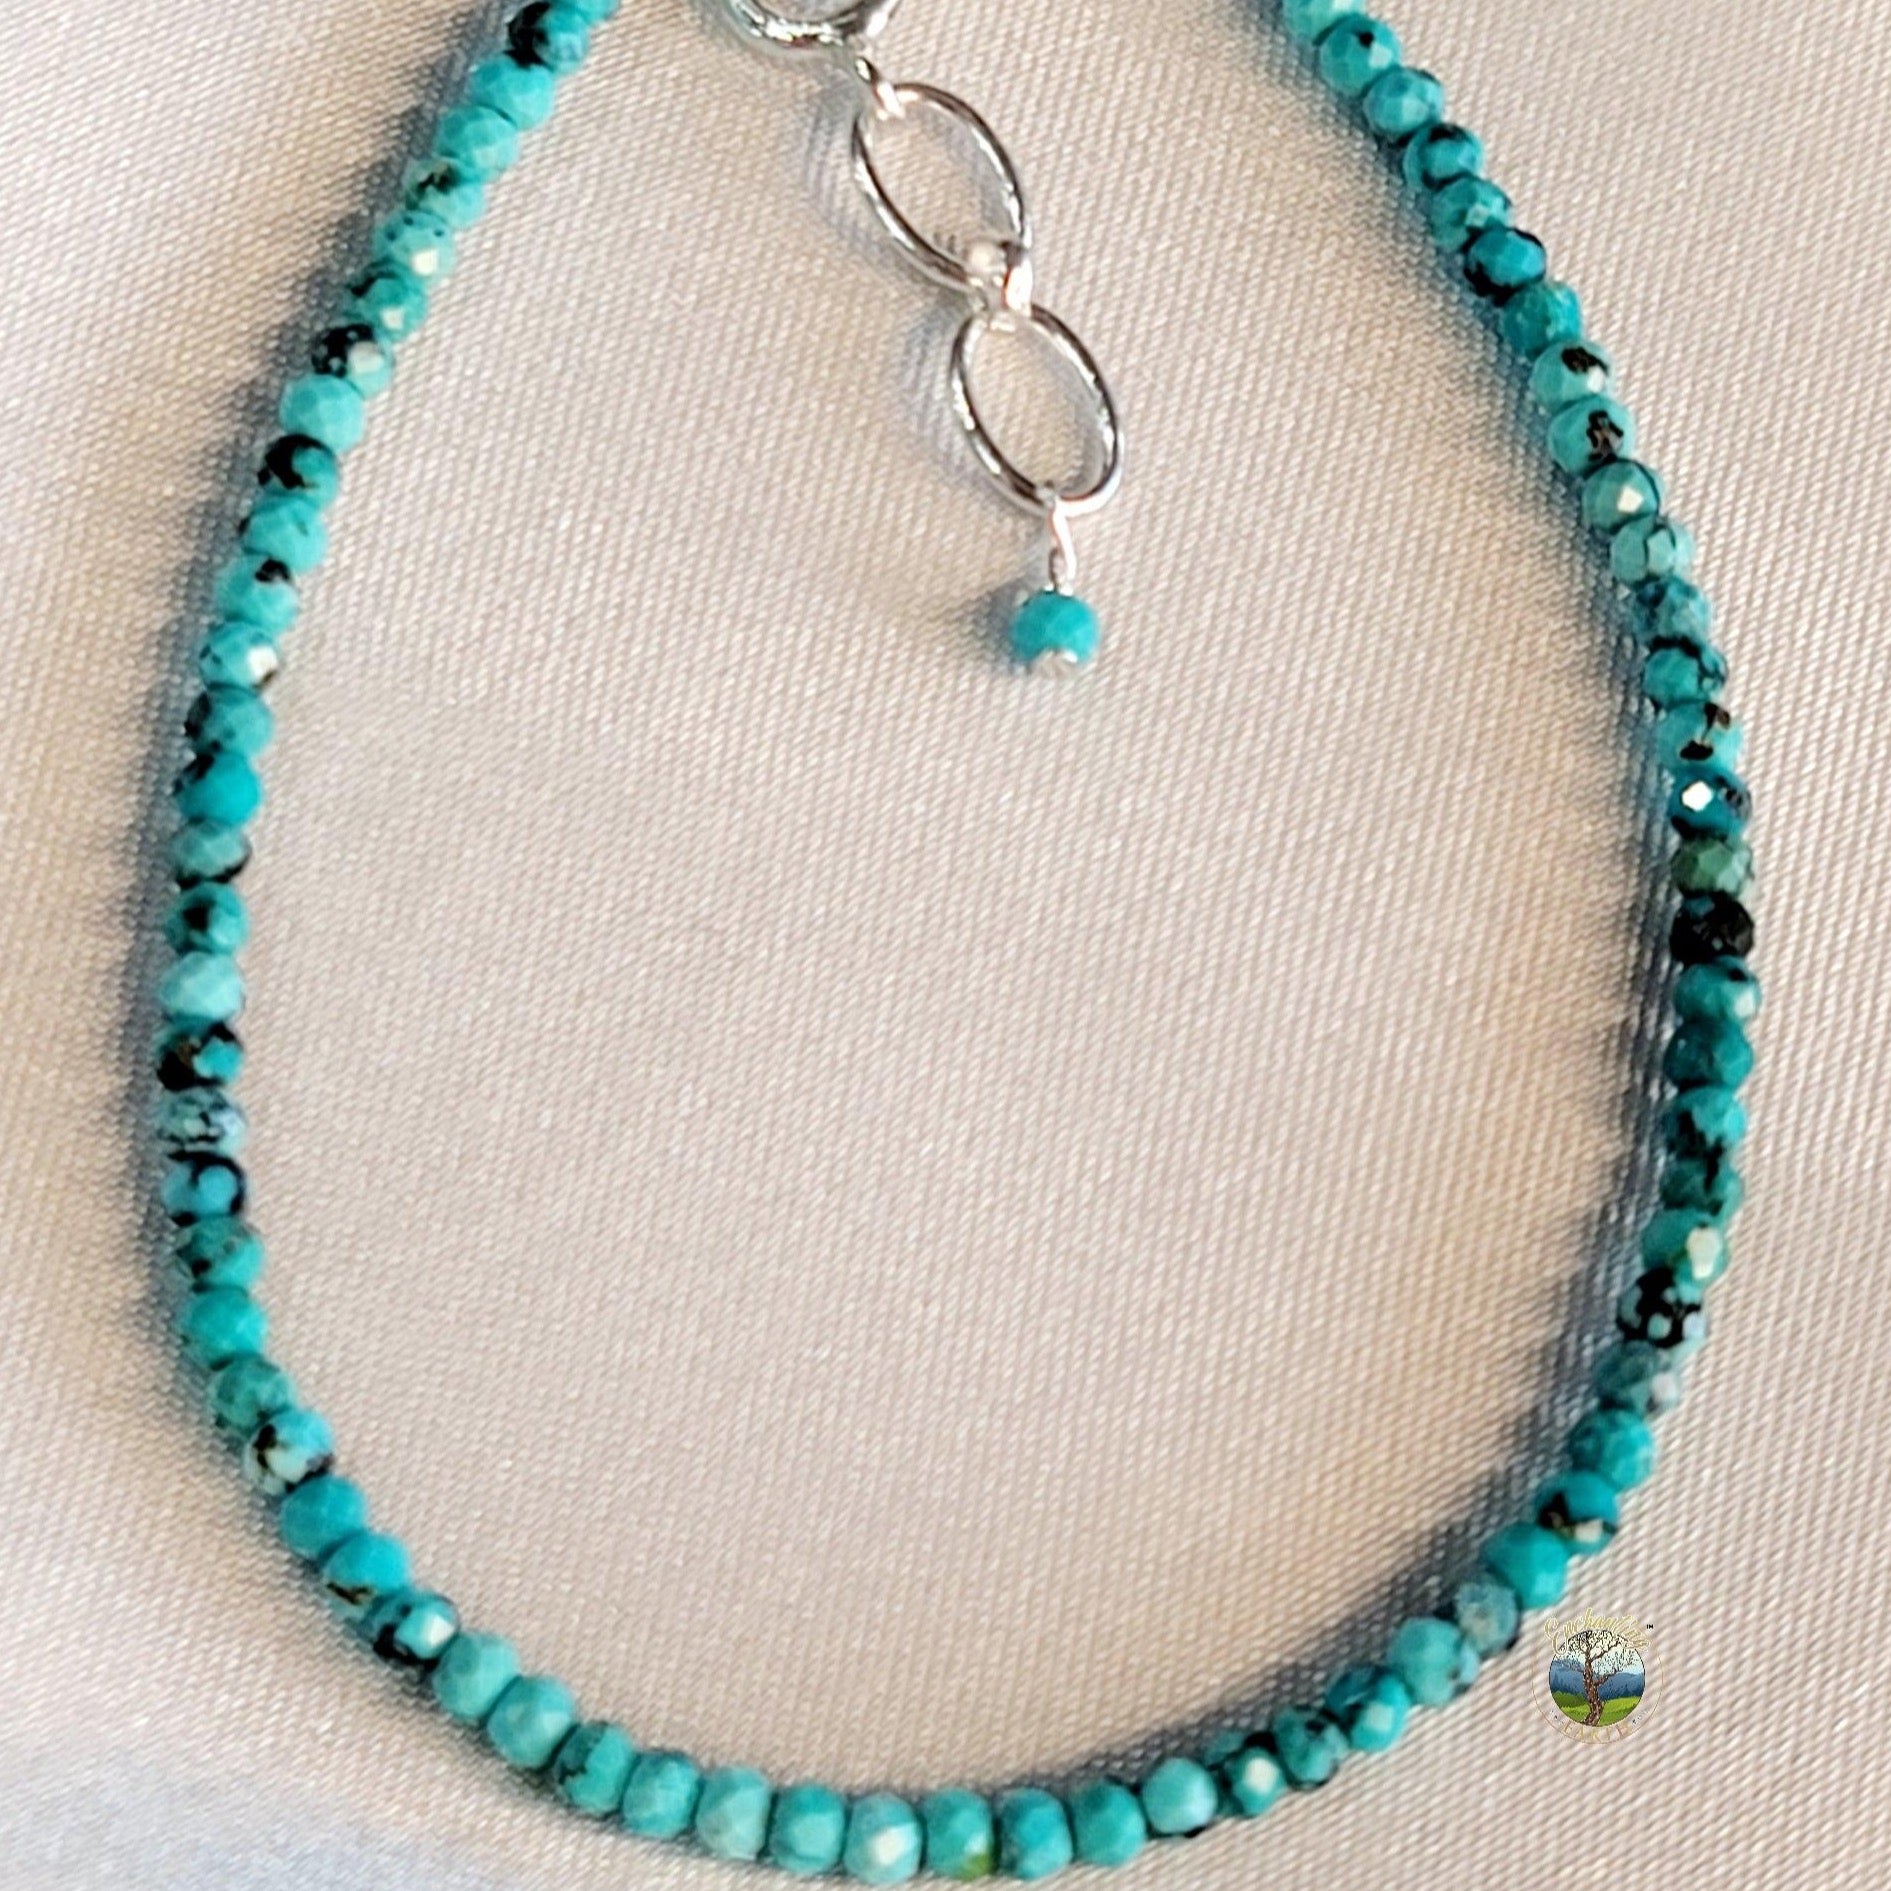 Turquoise Micro Faceted Bracelet